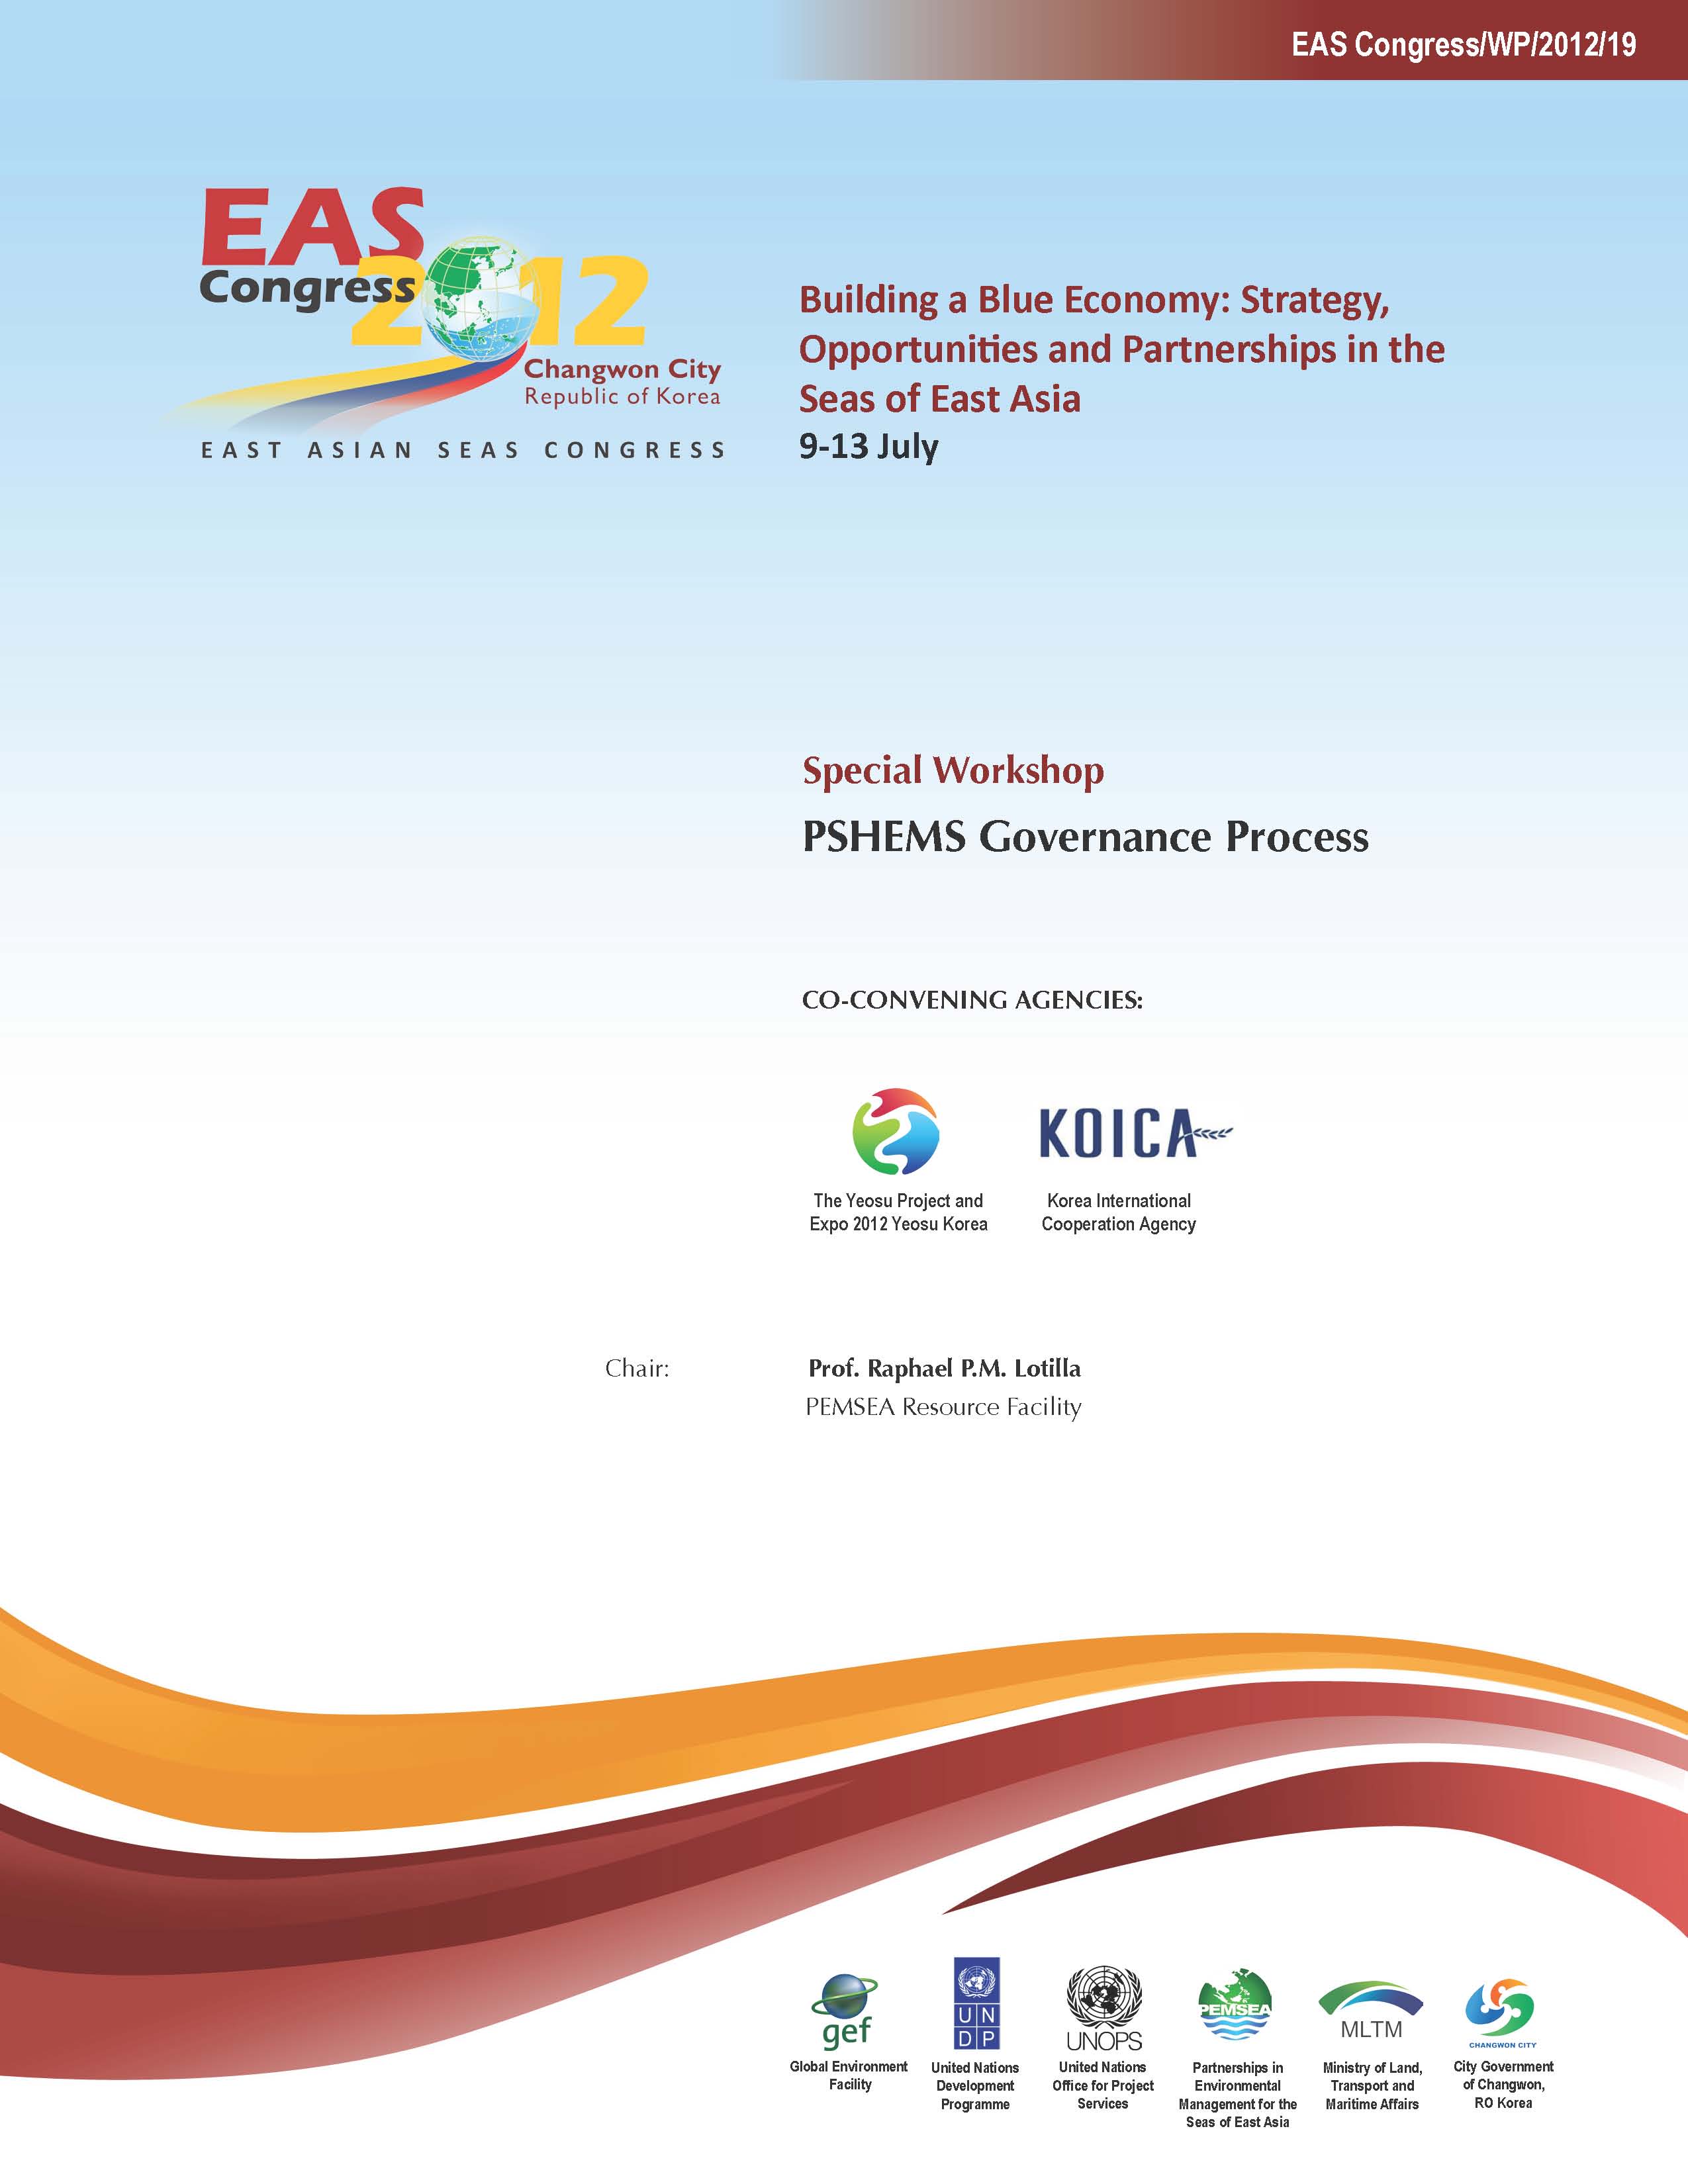 Proceedings of the Special Workshop on the PSHEMS Governance Process